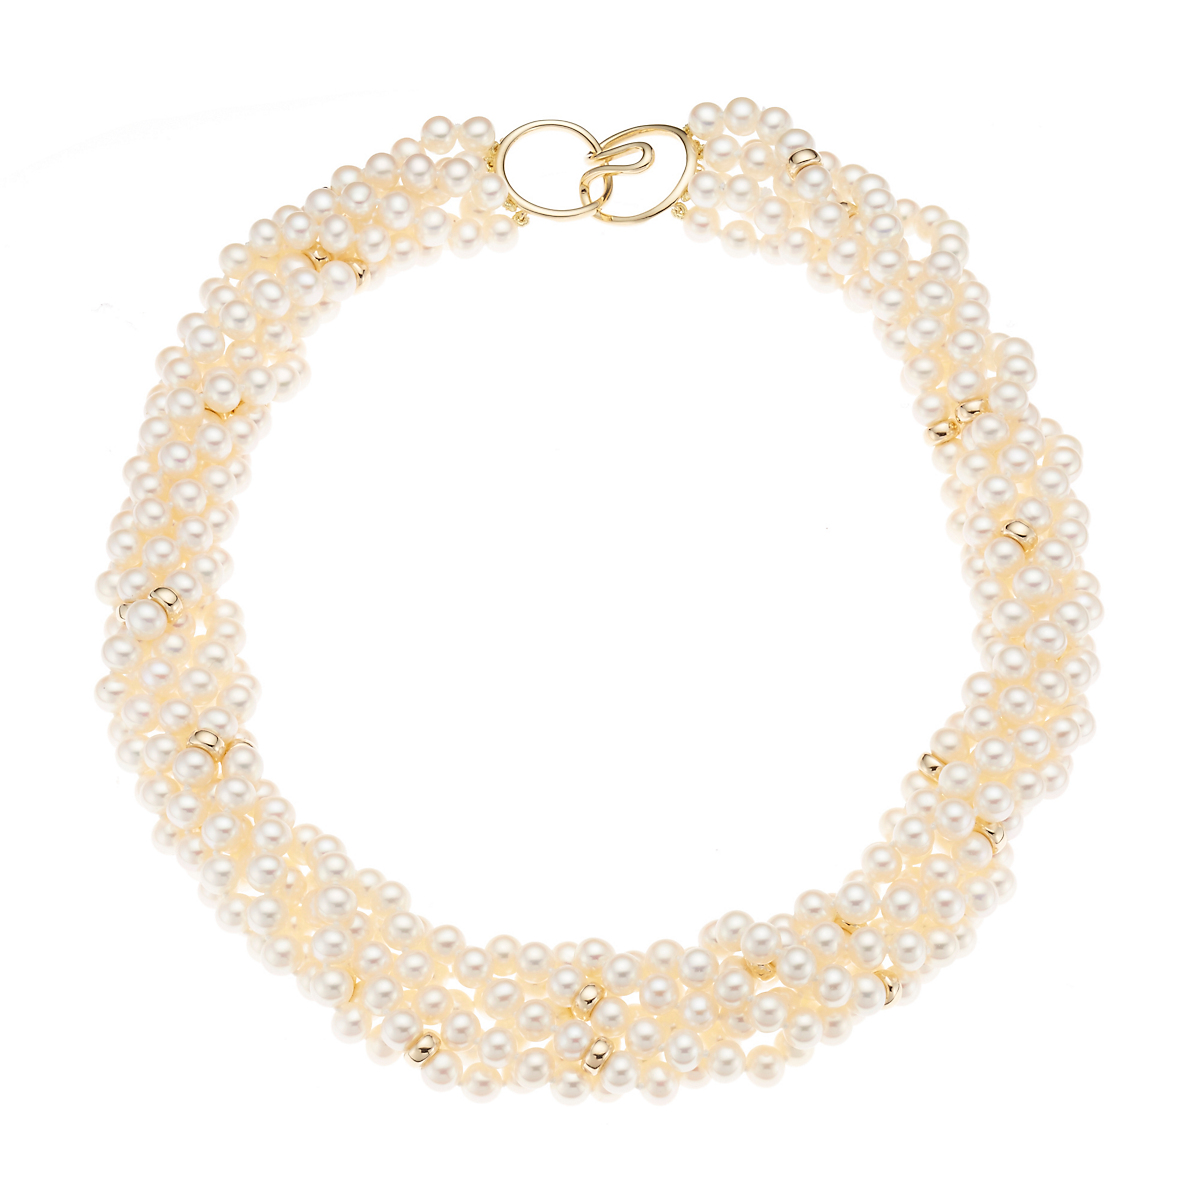 Gump's Six Strand Round Pearl Twist Necklace | Gump's